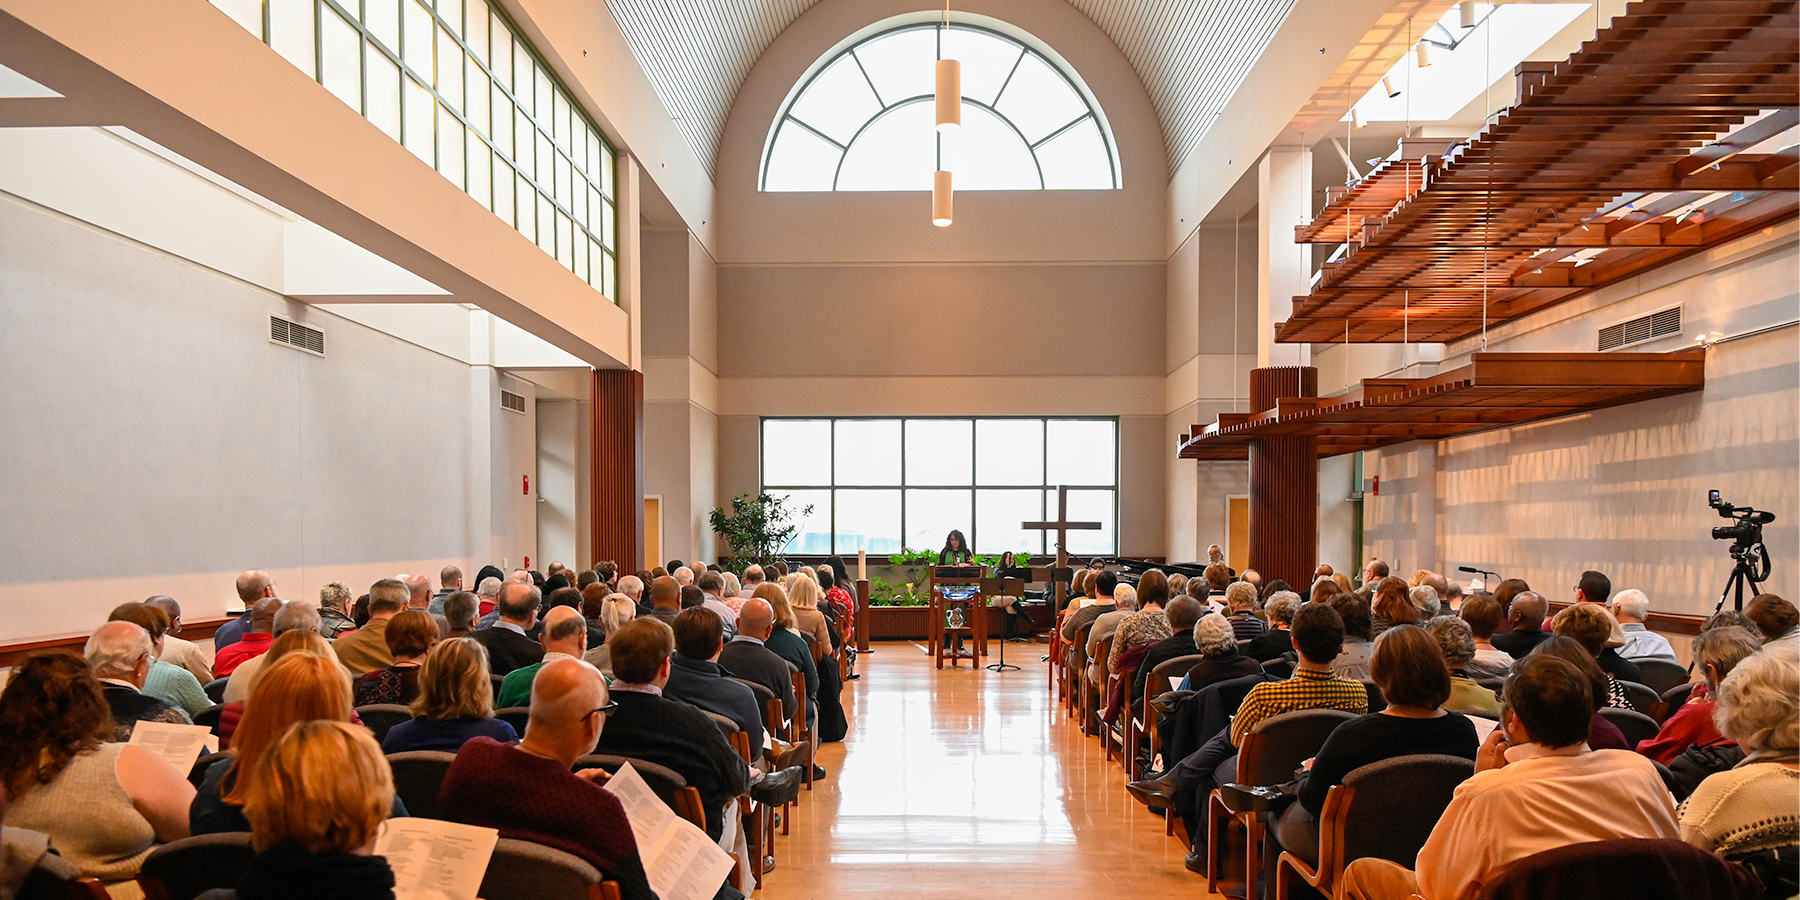 Participants of the Moderators' Conference gathered for worship at the Presbyterian Center's Chapel in Louisville, KY.